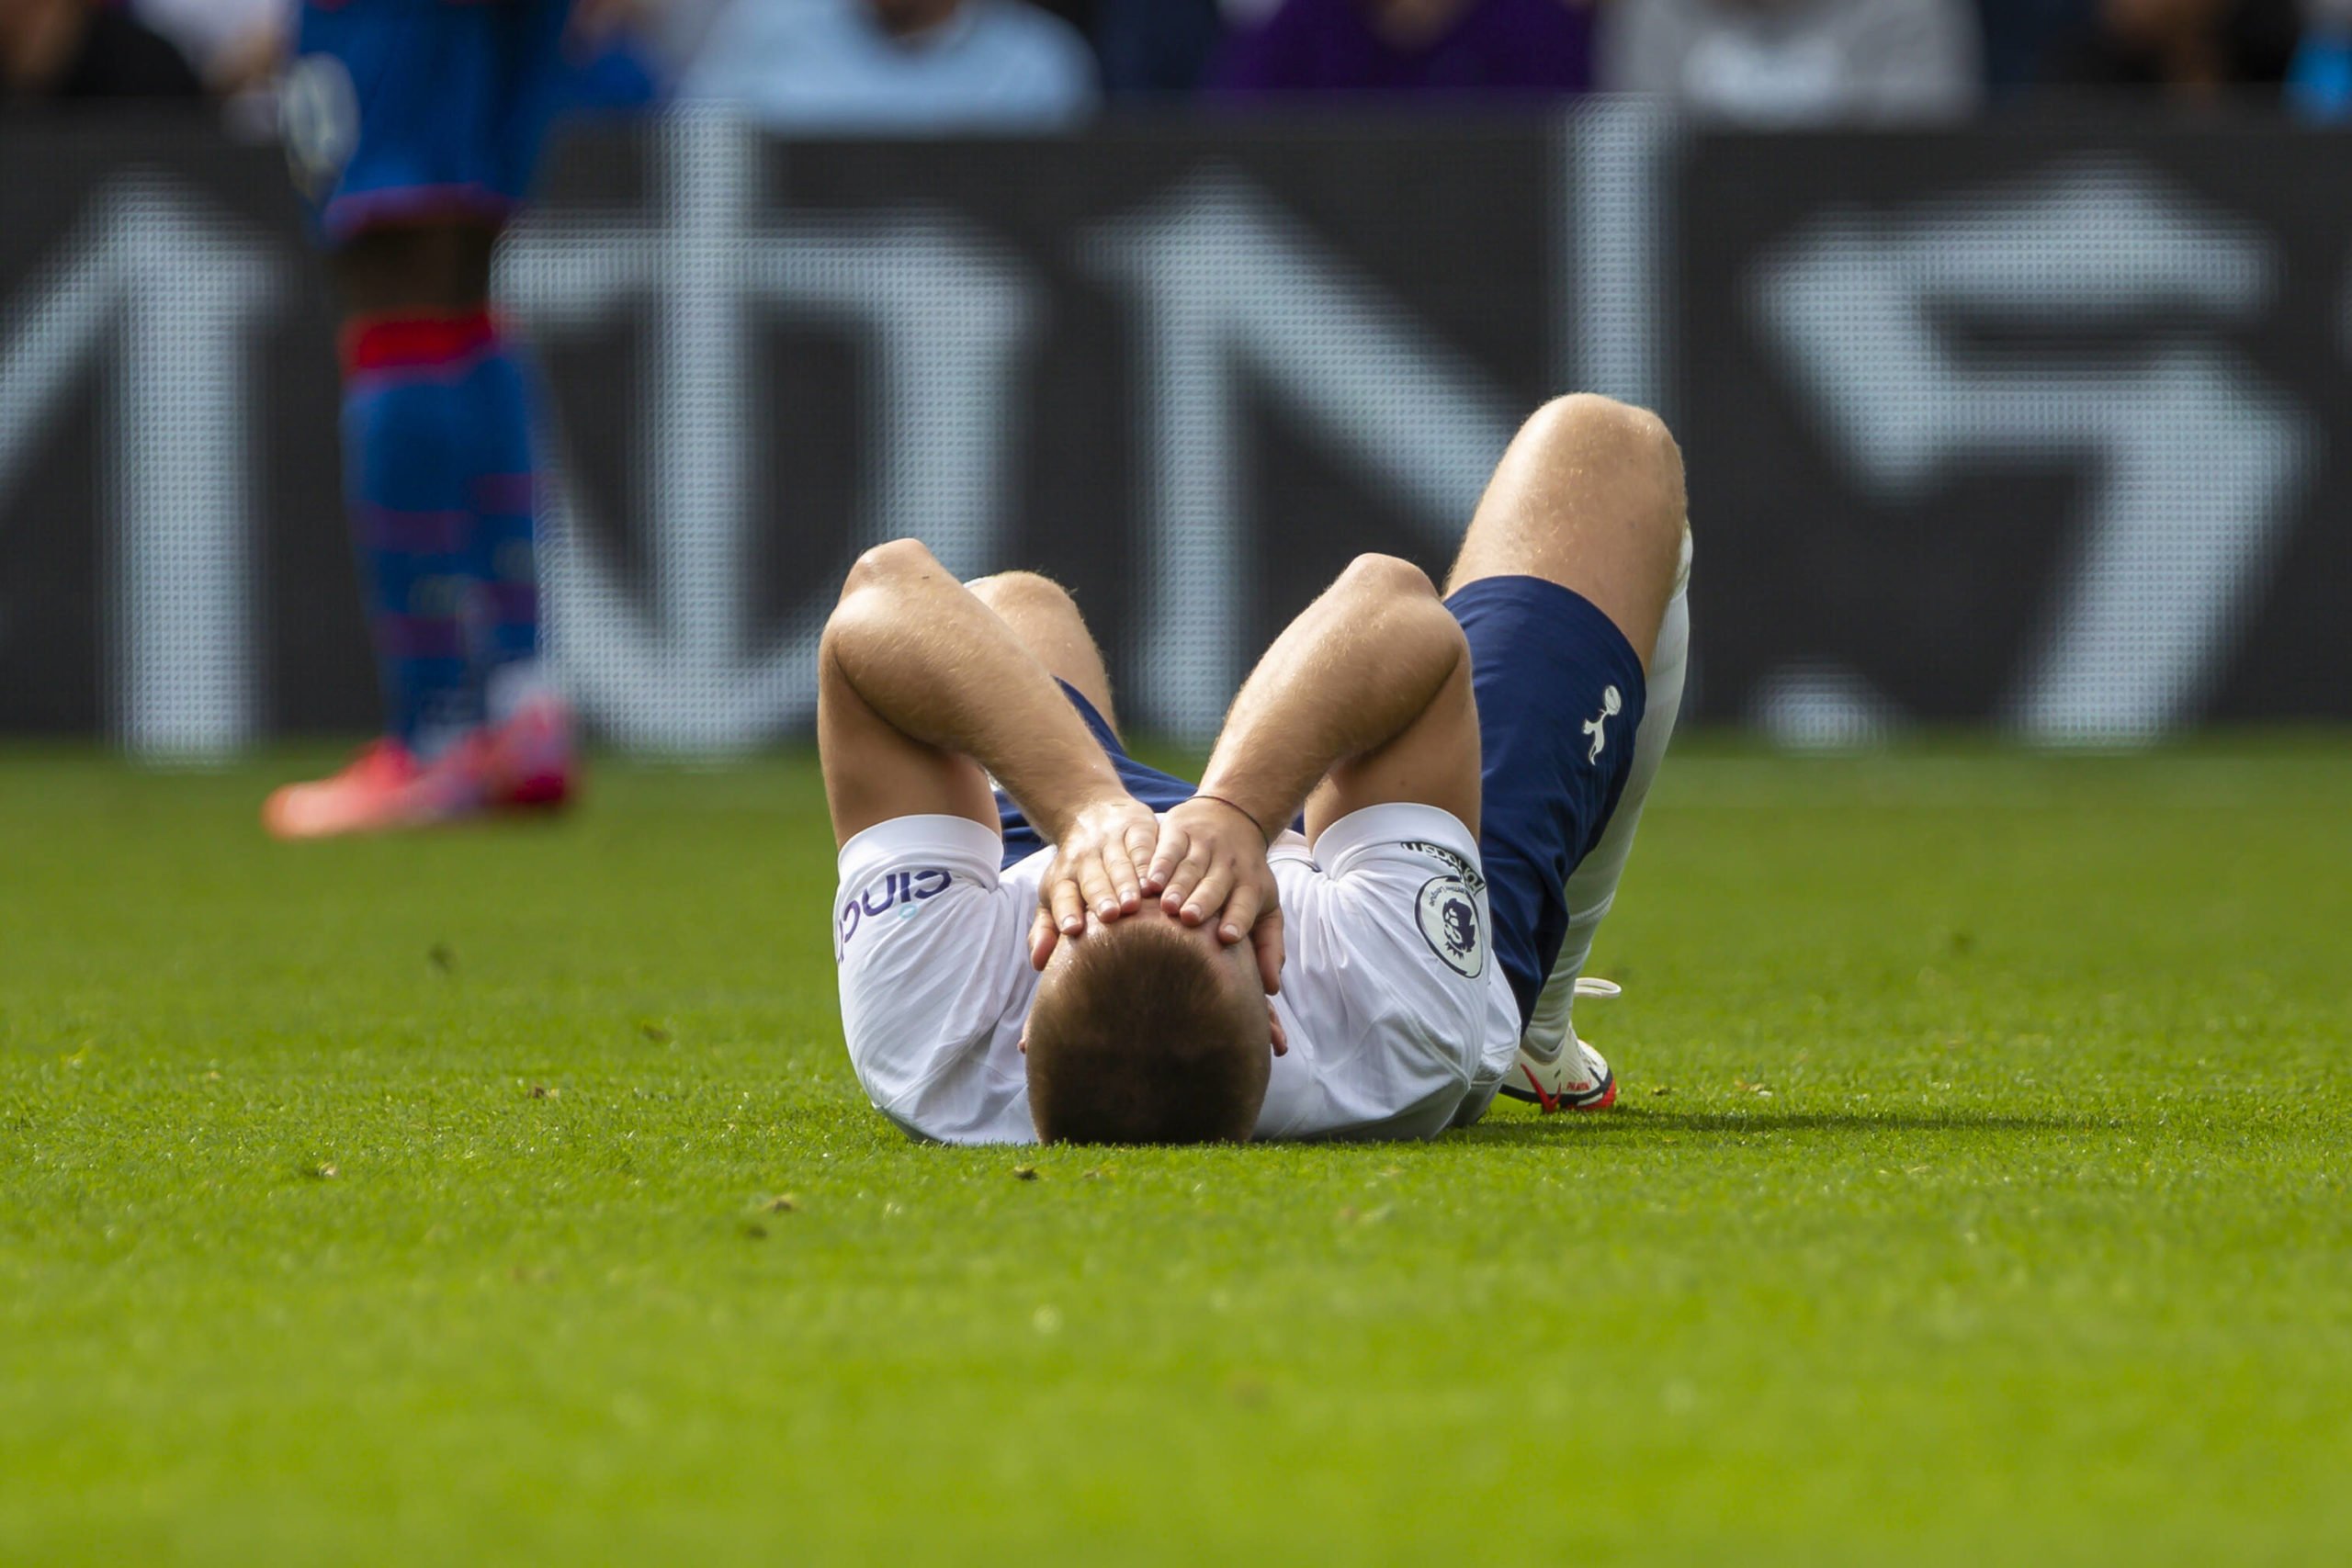 Tottenham Hotspur Player Ratings Vs Crystal Palace - Dier got injured early on.